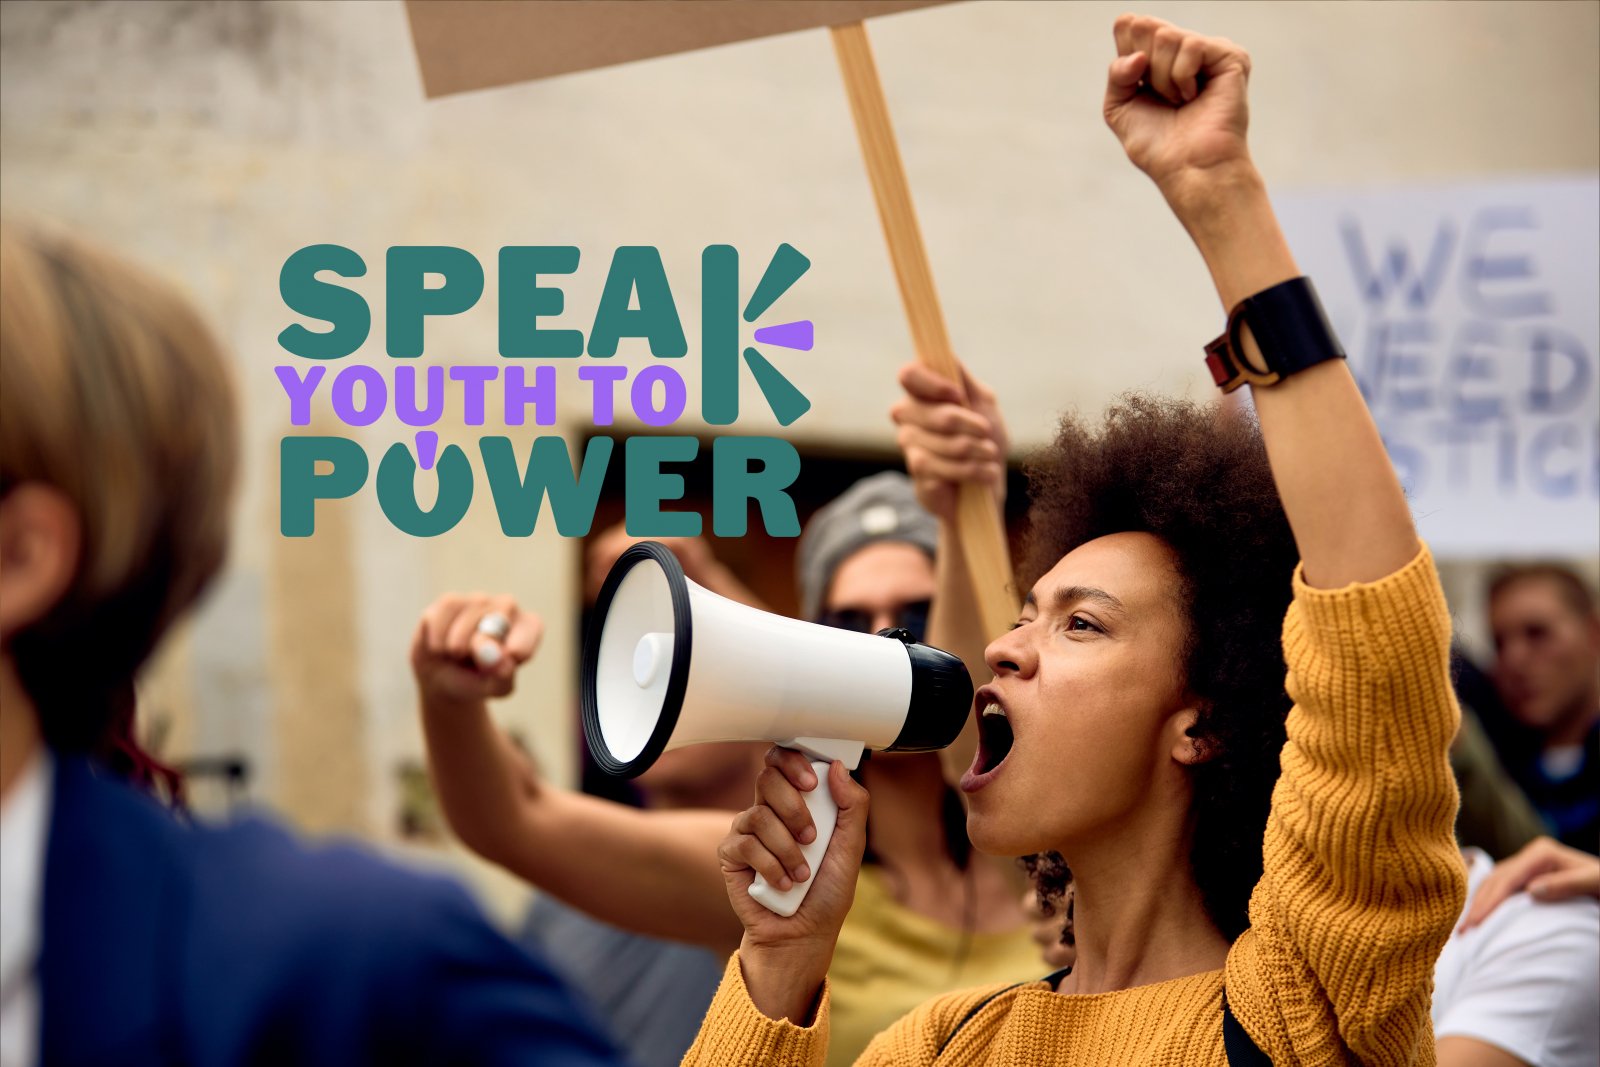 Speak Youth to Power: Inspiring a New Social Contract